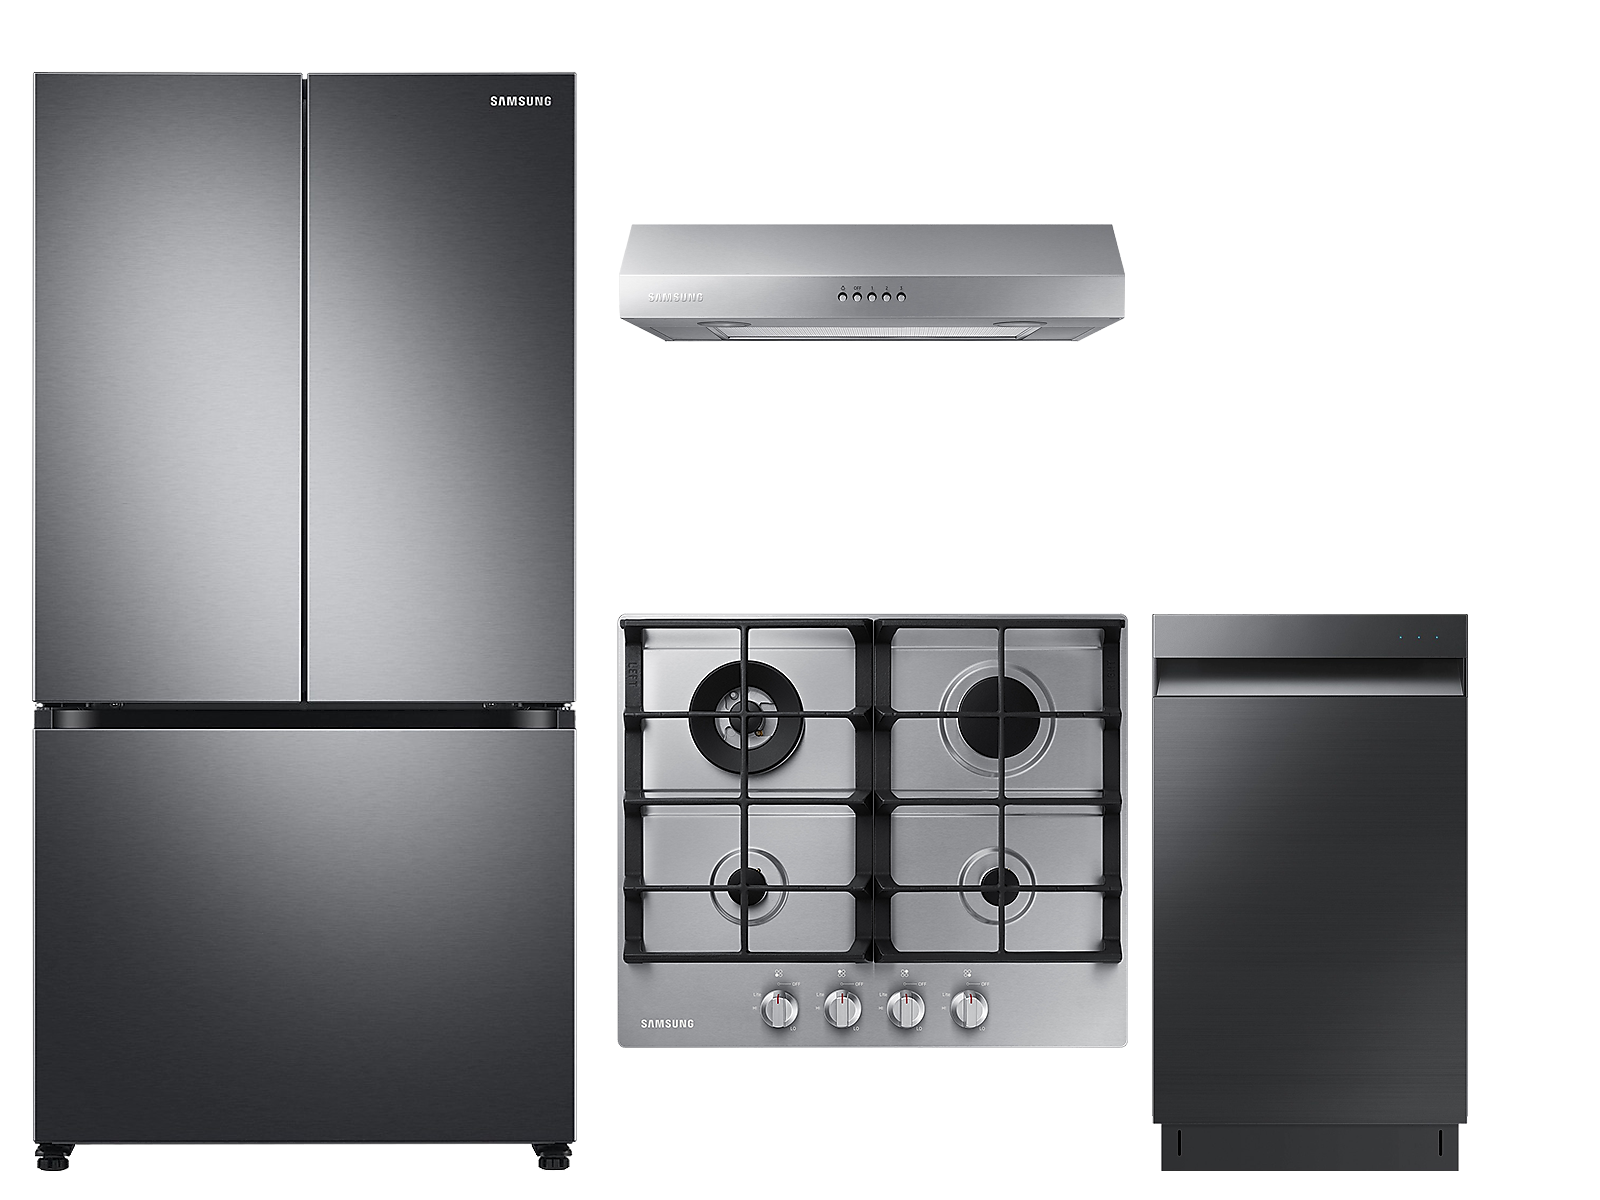 Samsung 3-Door French Door Refrigerator, gas cooktop, range hood and dishwaster small kitchen package(BNDL-1620847392253) photo